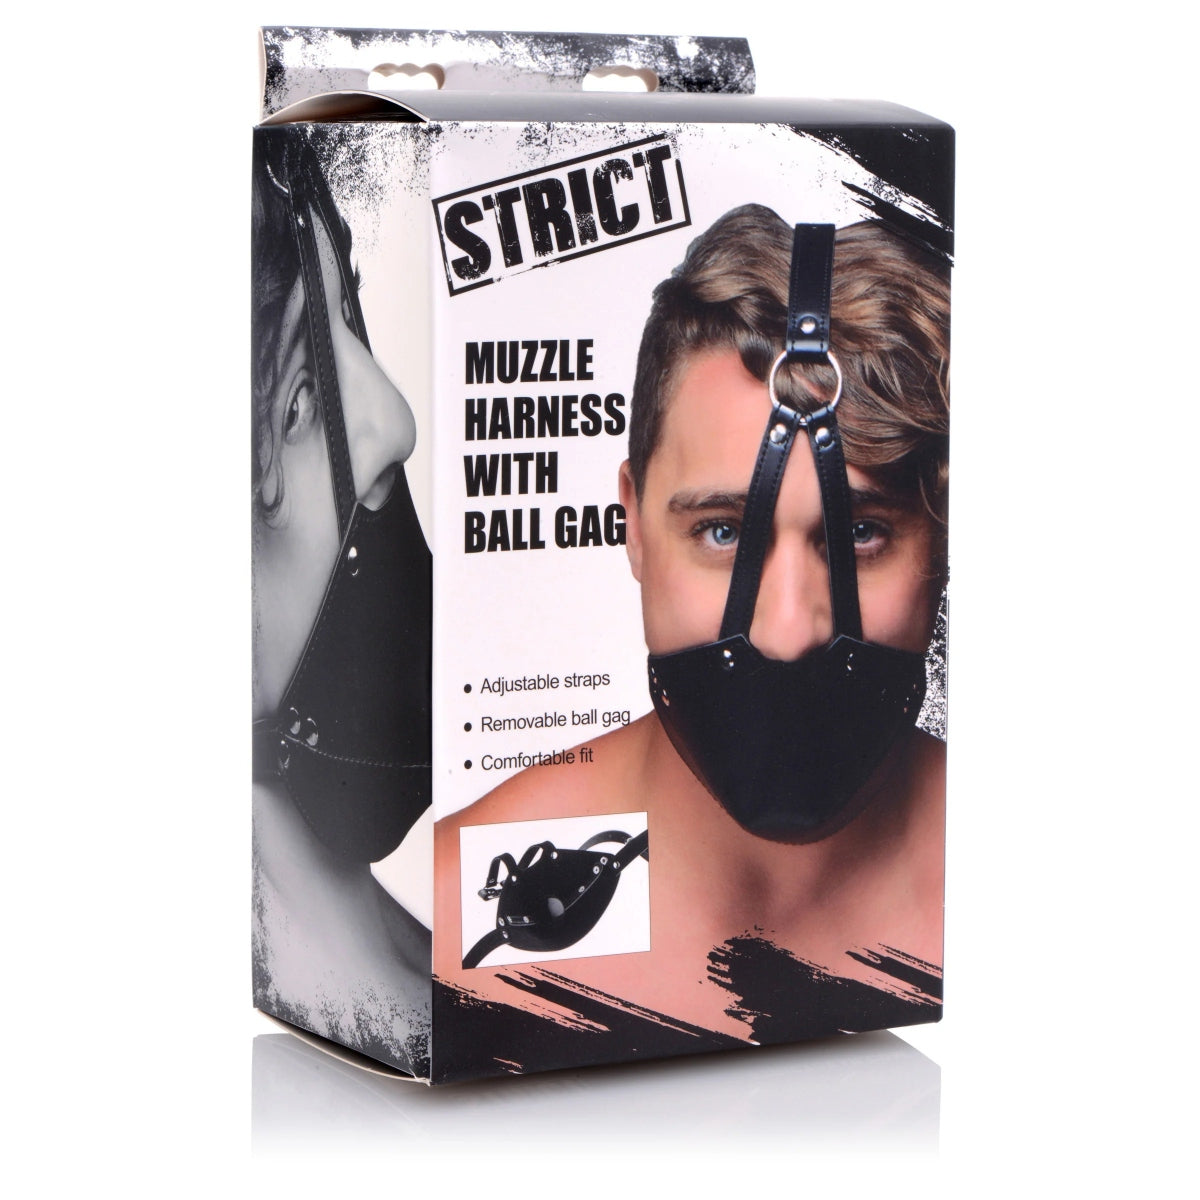 Strict Muzzle Harness With Ball Gag Black